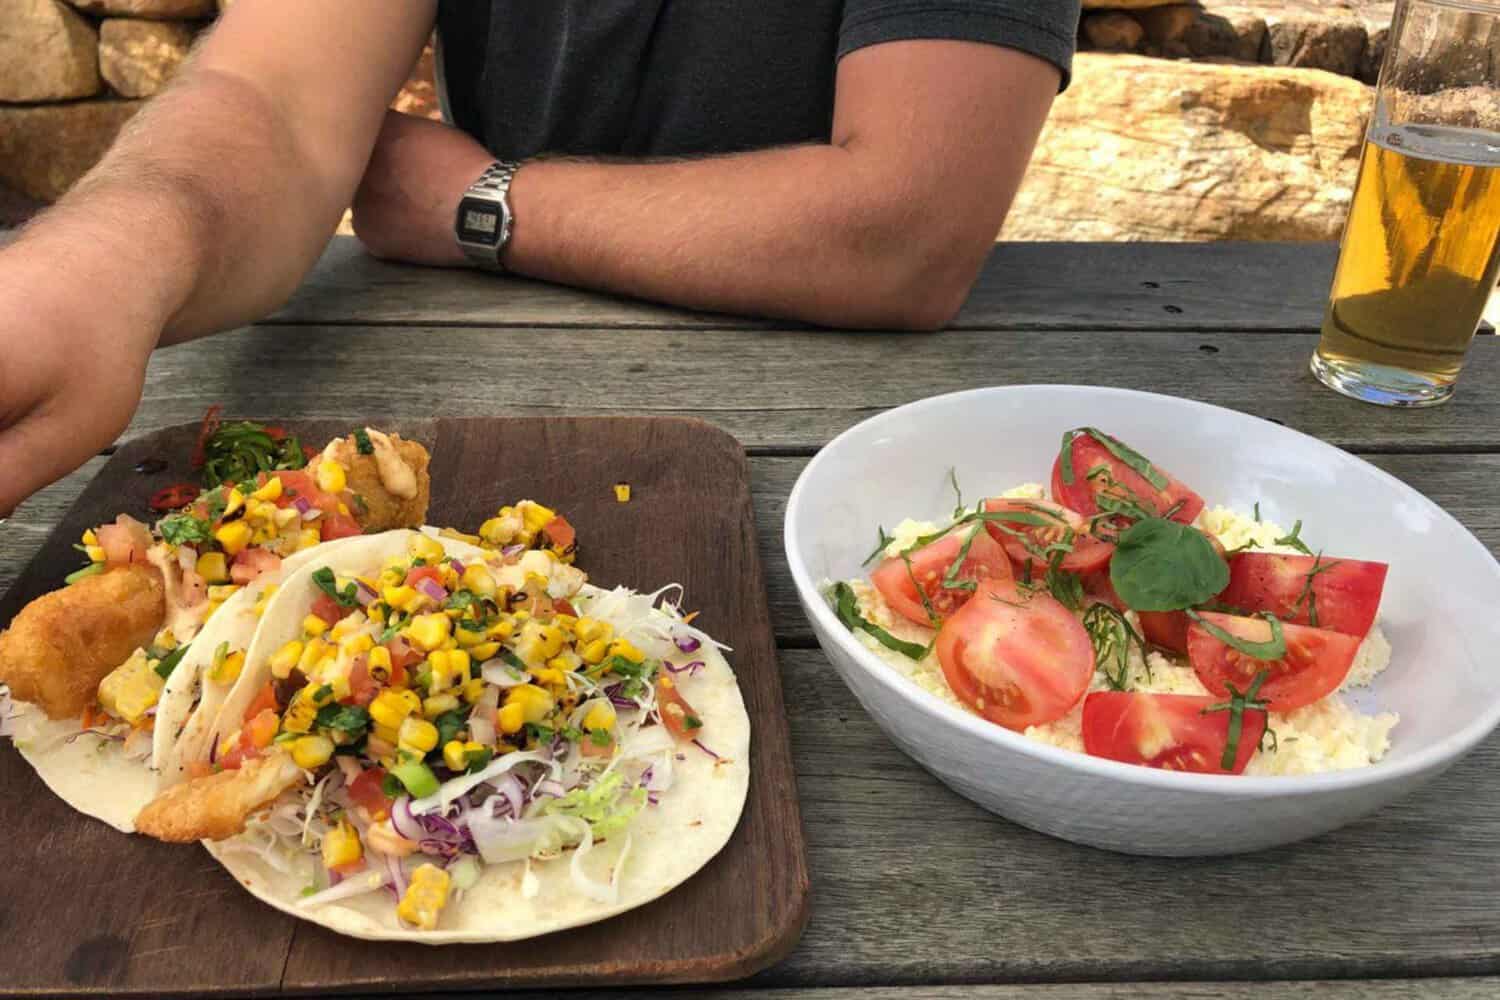 A delectable dish of fish tacos and fresh tomatoes served on a wooden table at a Margaret River brewery, with a pint of beer on the side. The tacos are garnished with a corn salsa, and the side of fresh tomatoes add a bright pop of color to the table.